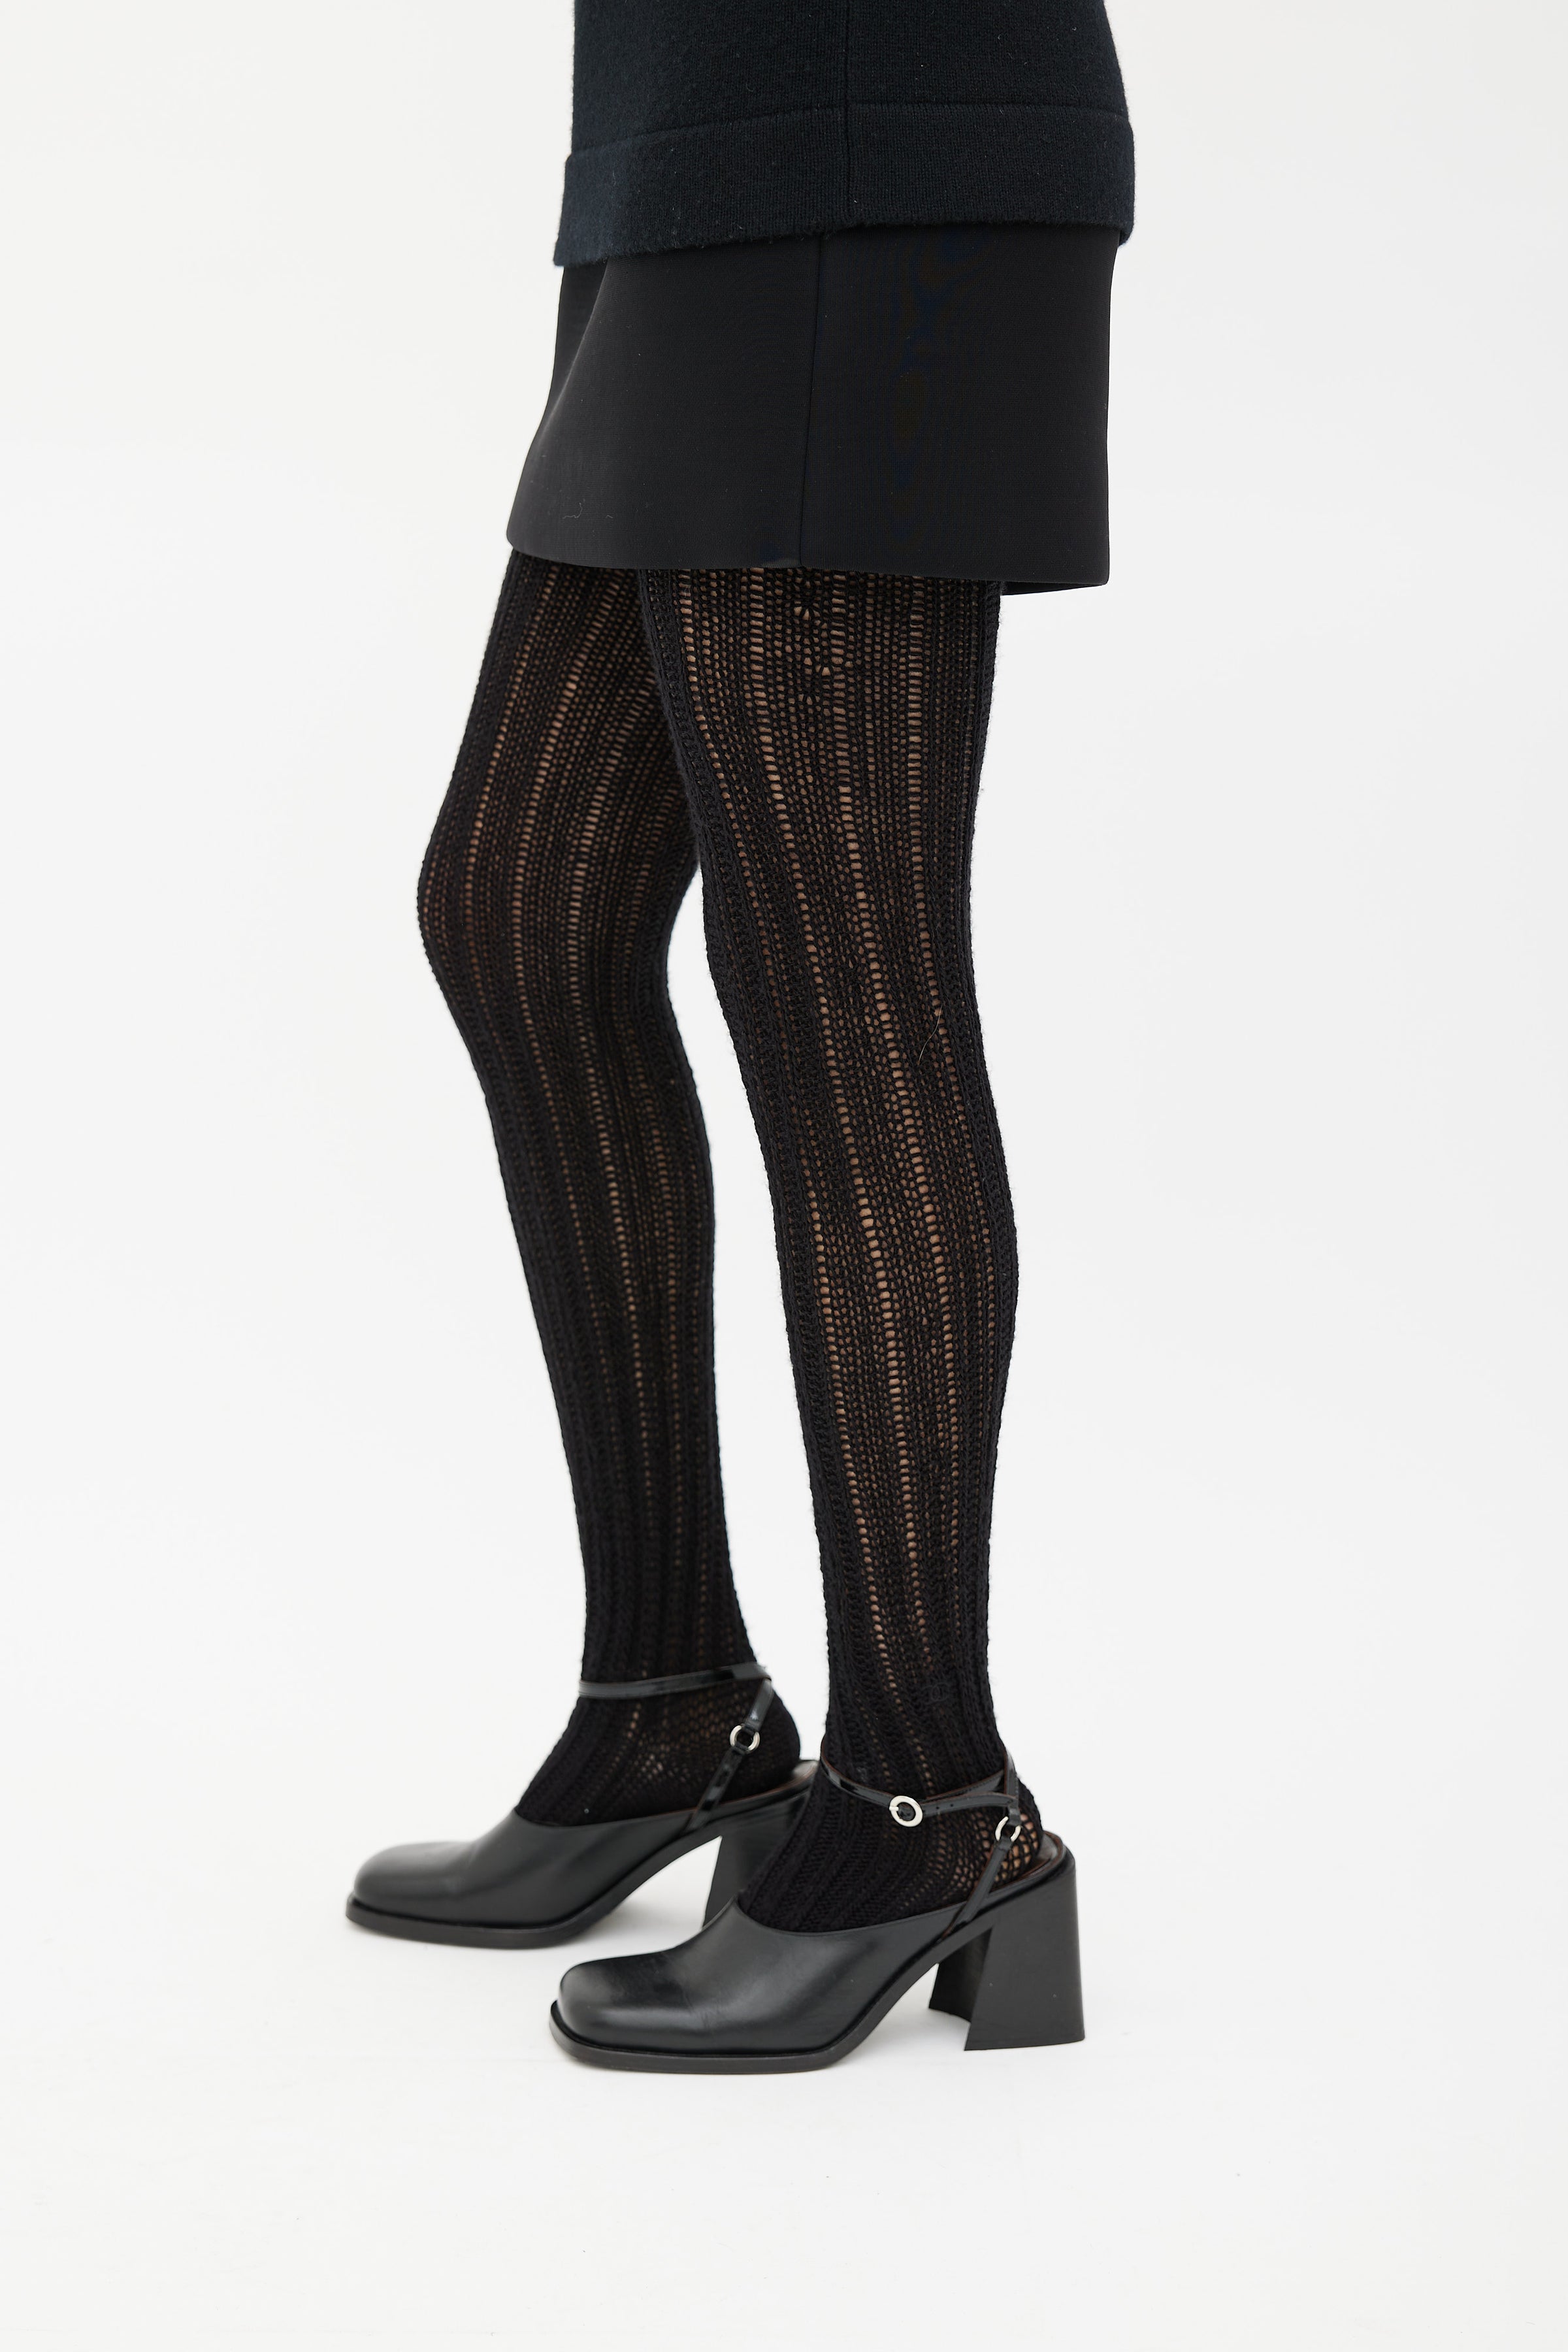 black chanel tights for women